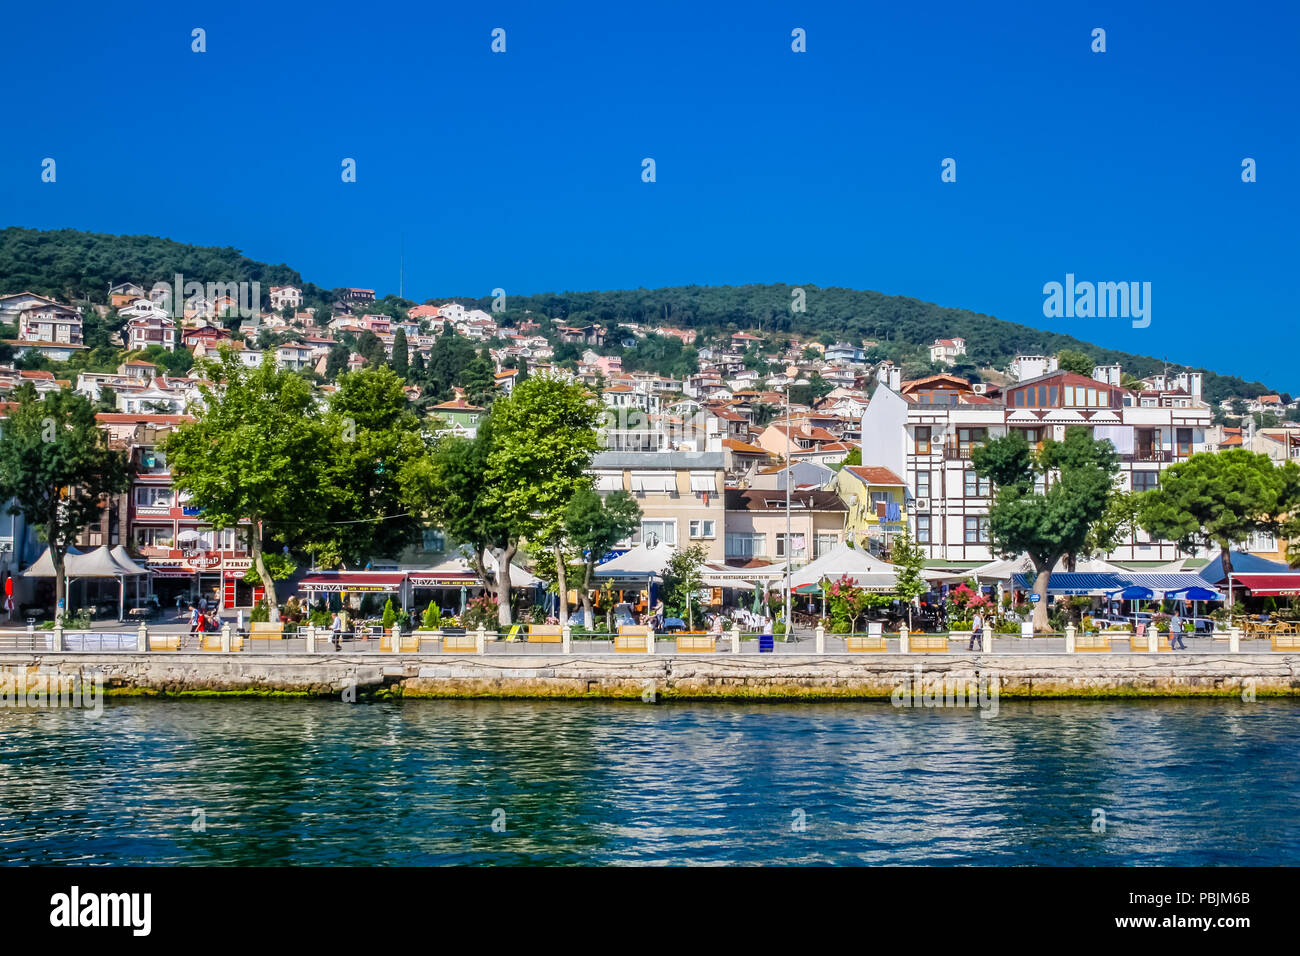 Istanbul, Turkey, July 13, 2010: View of the promenade of Burgazada, one of the Princes Islands. Stock Photo